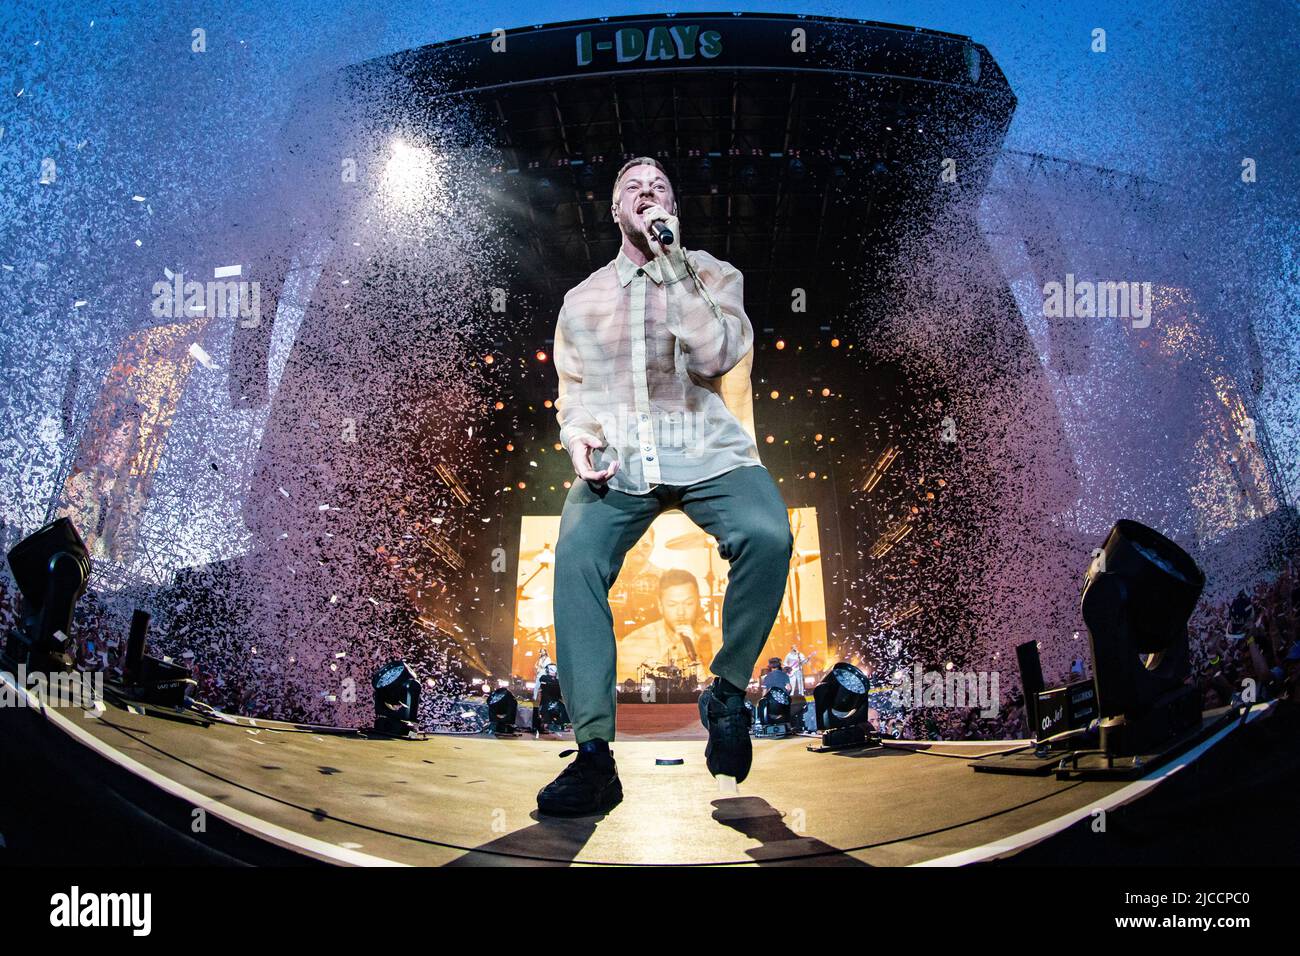 Milan Italy. 11 June 2022. TheAmerican pop rock band IMAGINE DRAGONS  performs live on stage at Ippodromo SNAI La Maura during the 'I-Days Festival 2022'. Stock Photo